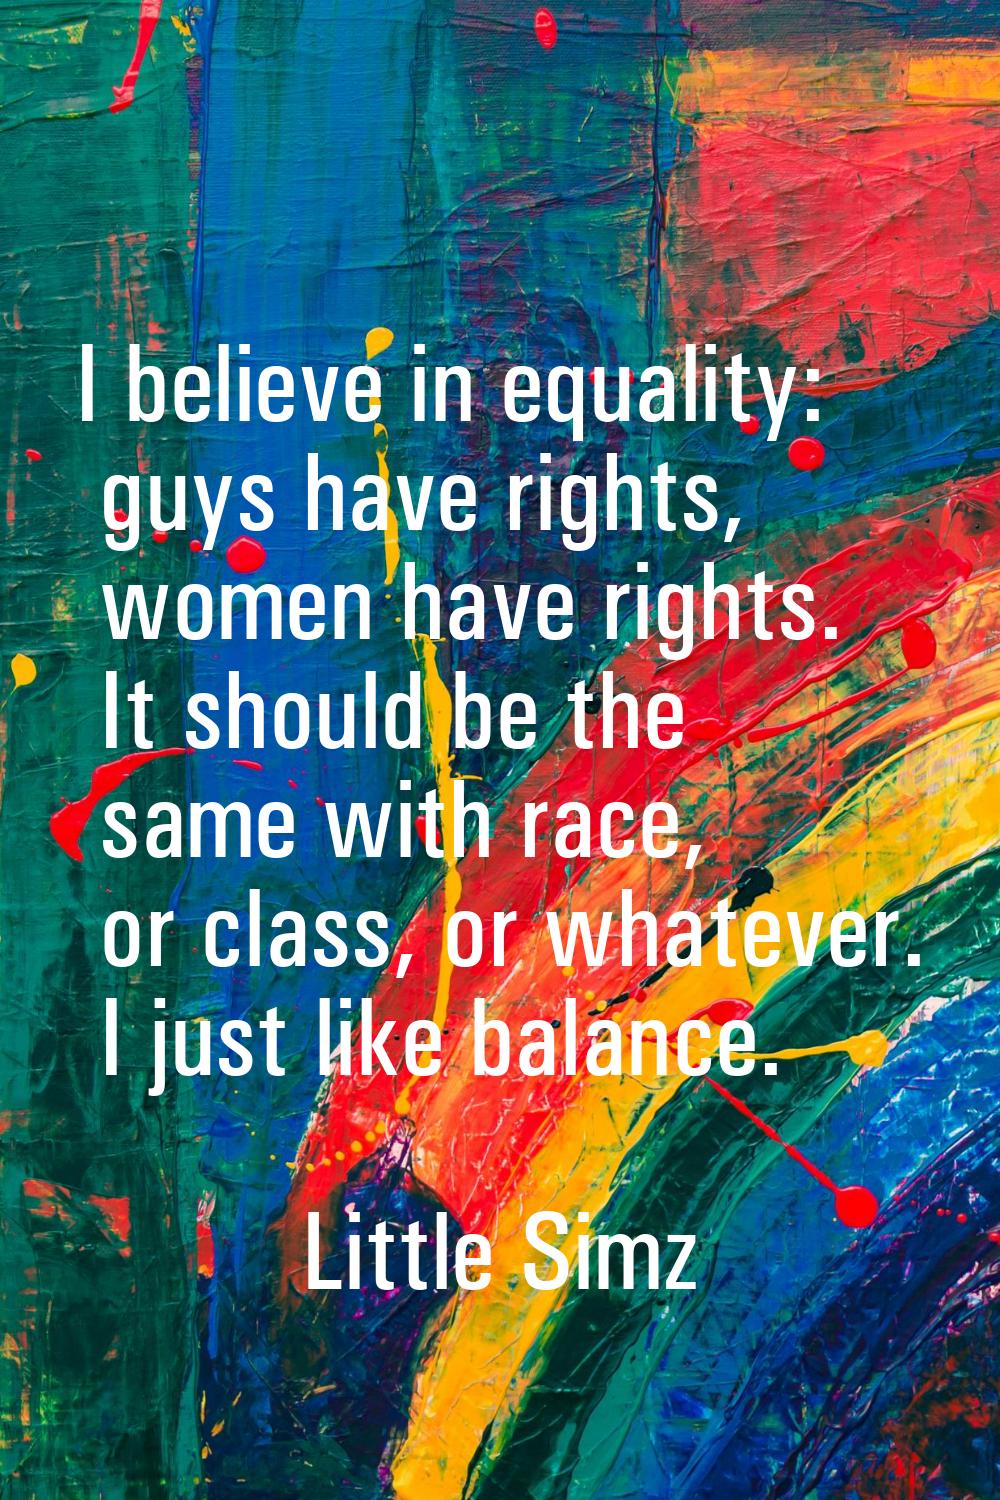 I believe in equality: guys have rights, women have rights. It should be the same with race, or cla